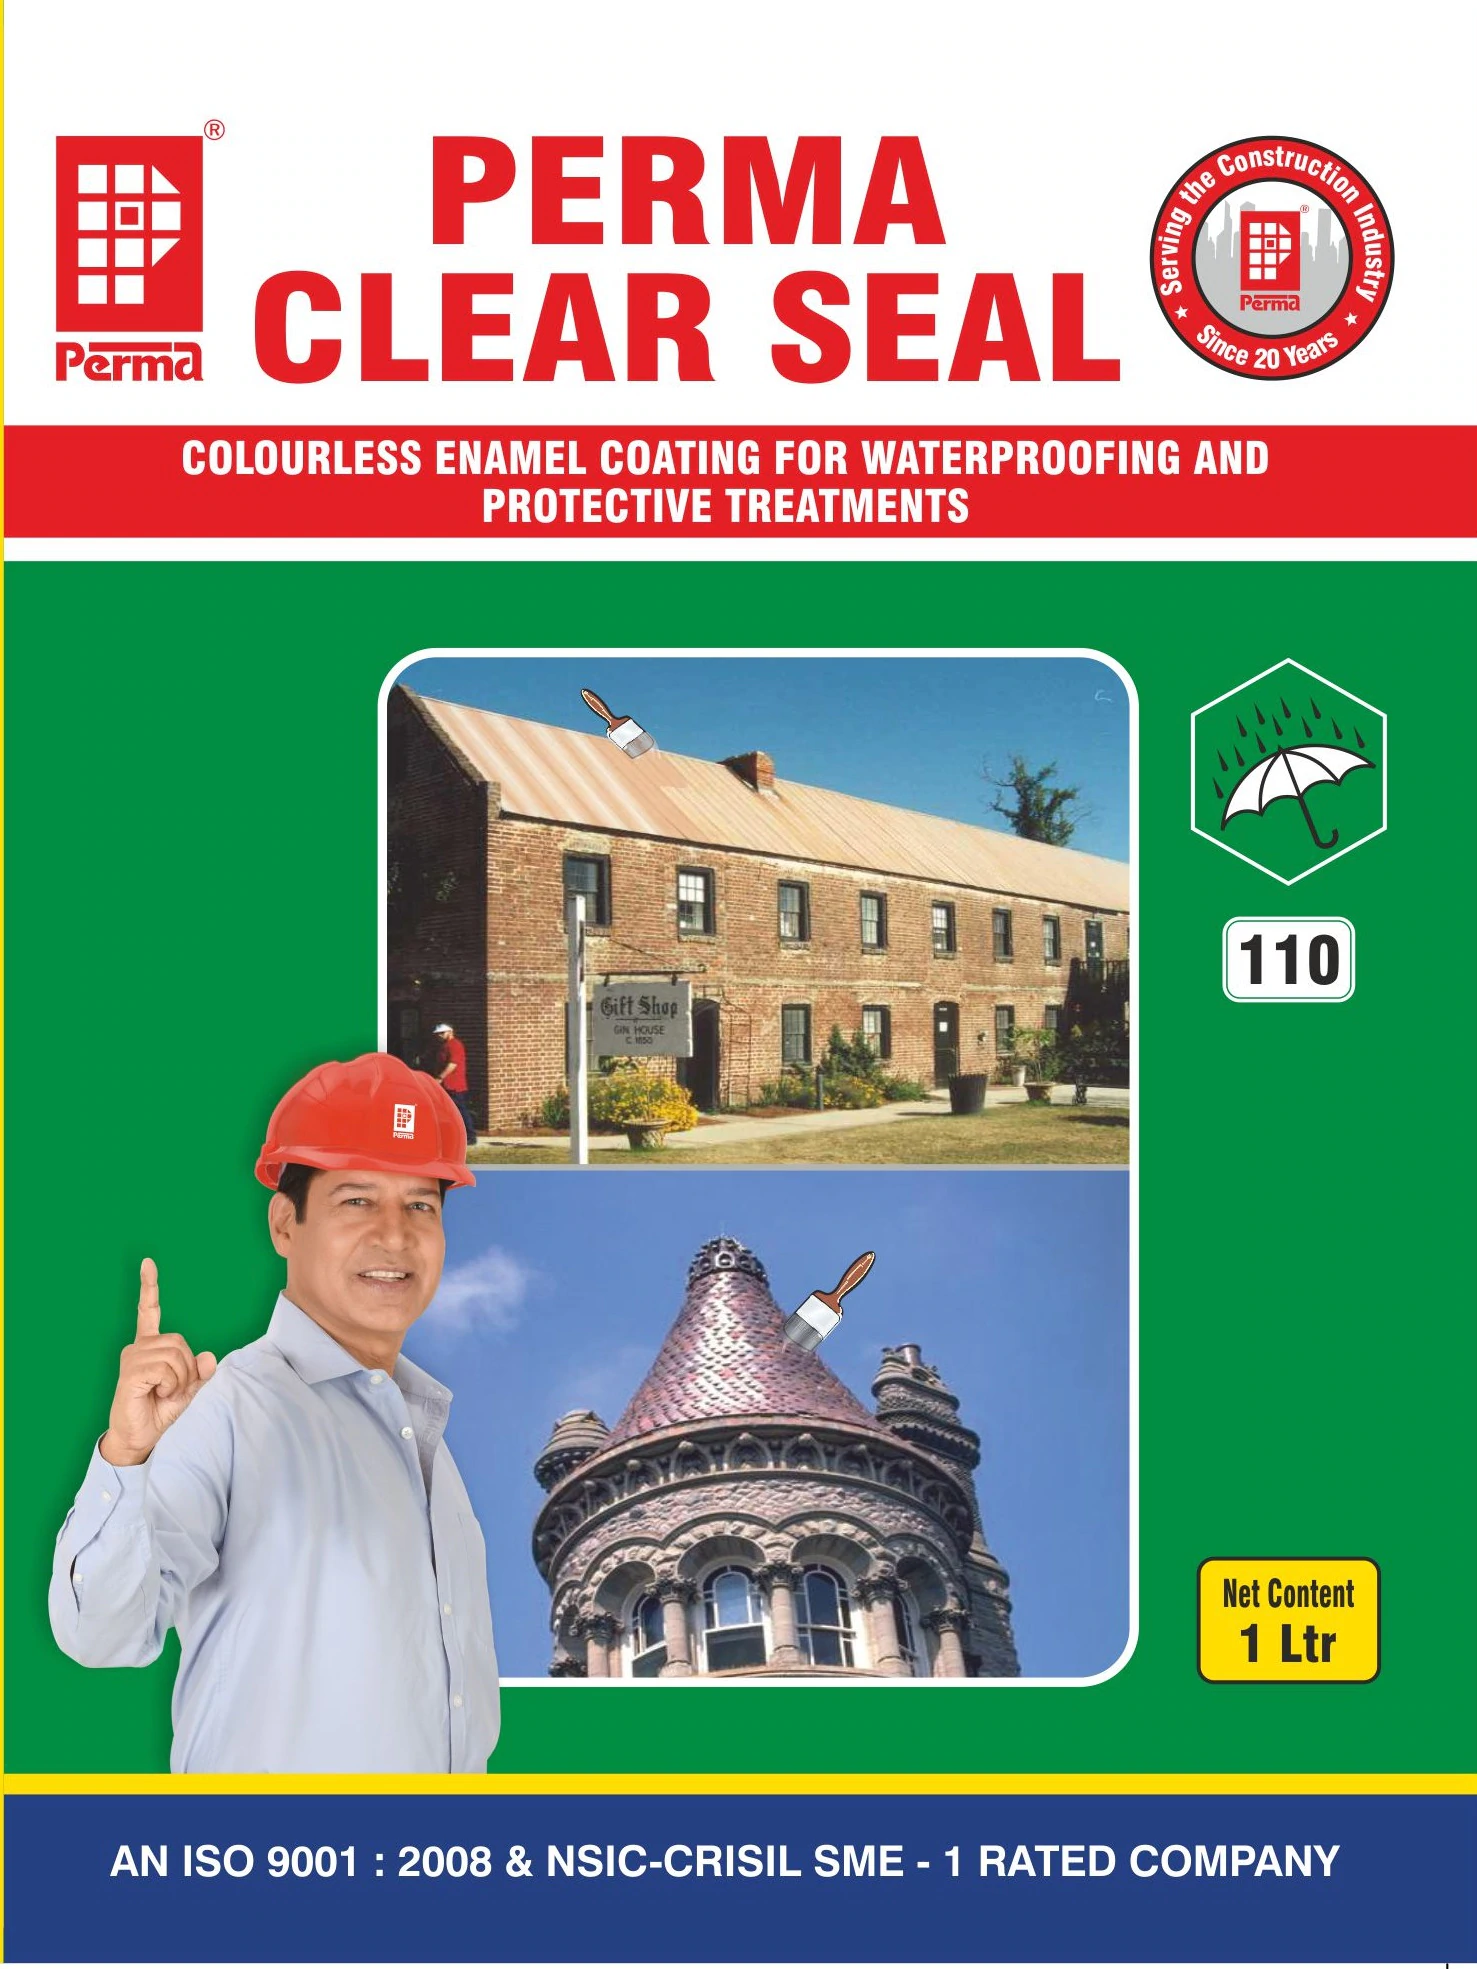 Perma Clear Seal(1)